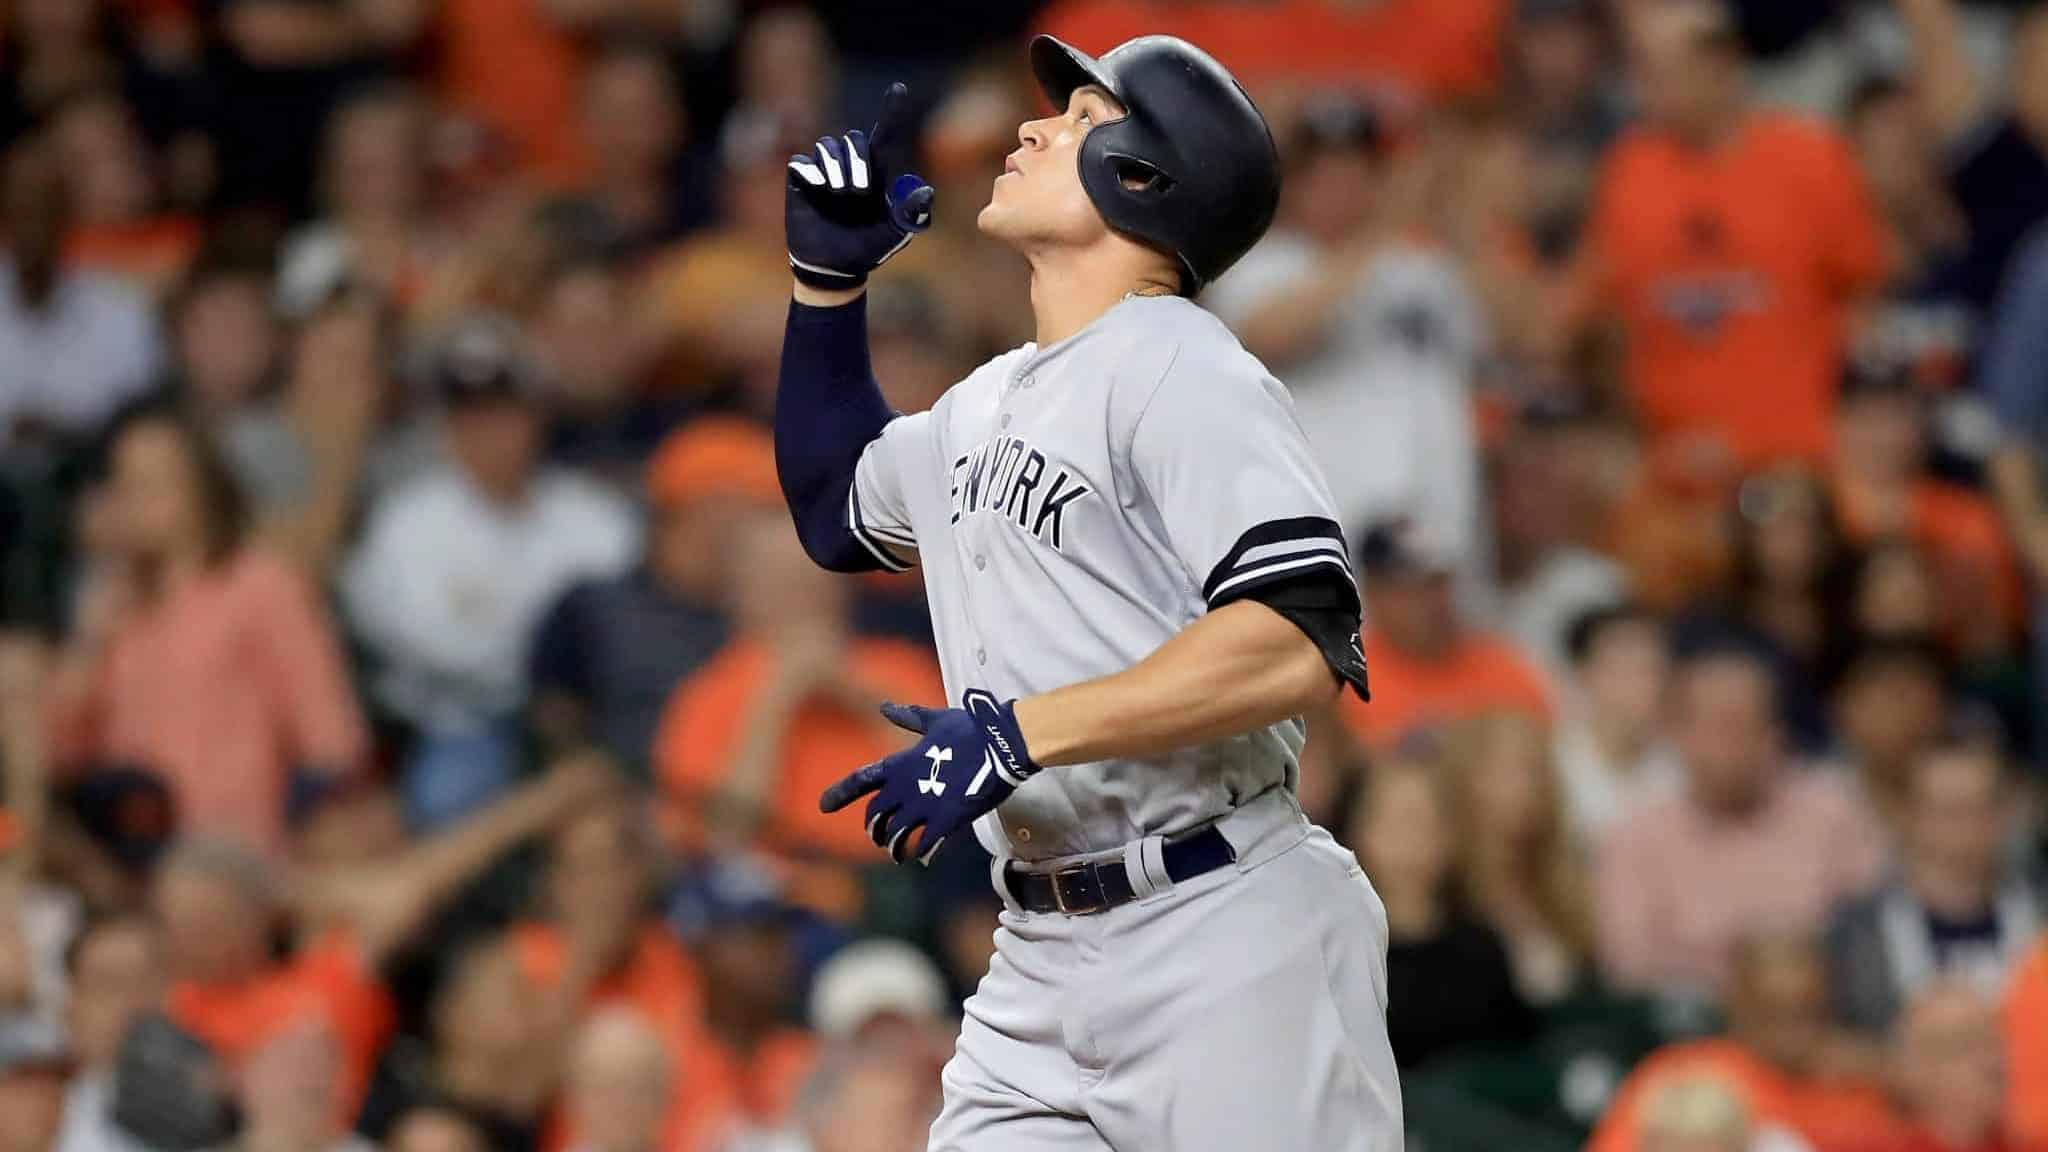 HOUSTON, TX - OCTOBER 20: Aaron Judge #99 of the New York Yankees celebrates after hitting a solo home run against Brad Peacock #41 of the Houston Astros during the eighth inning in Game Six of the American League Championship Series at Minute Maid Park on October 20, 2017 in Houston, Texas.